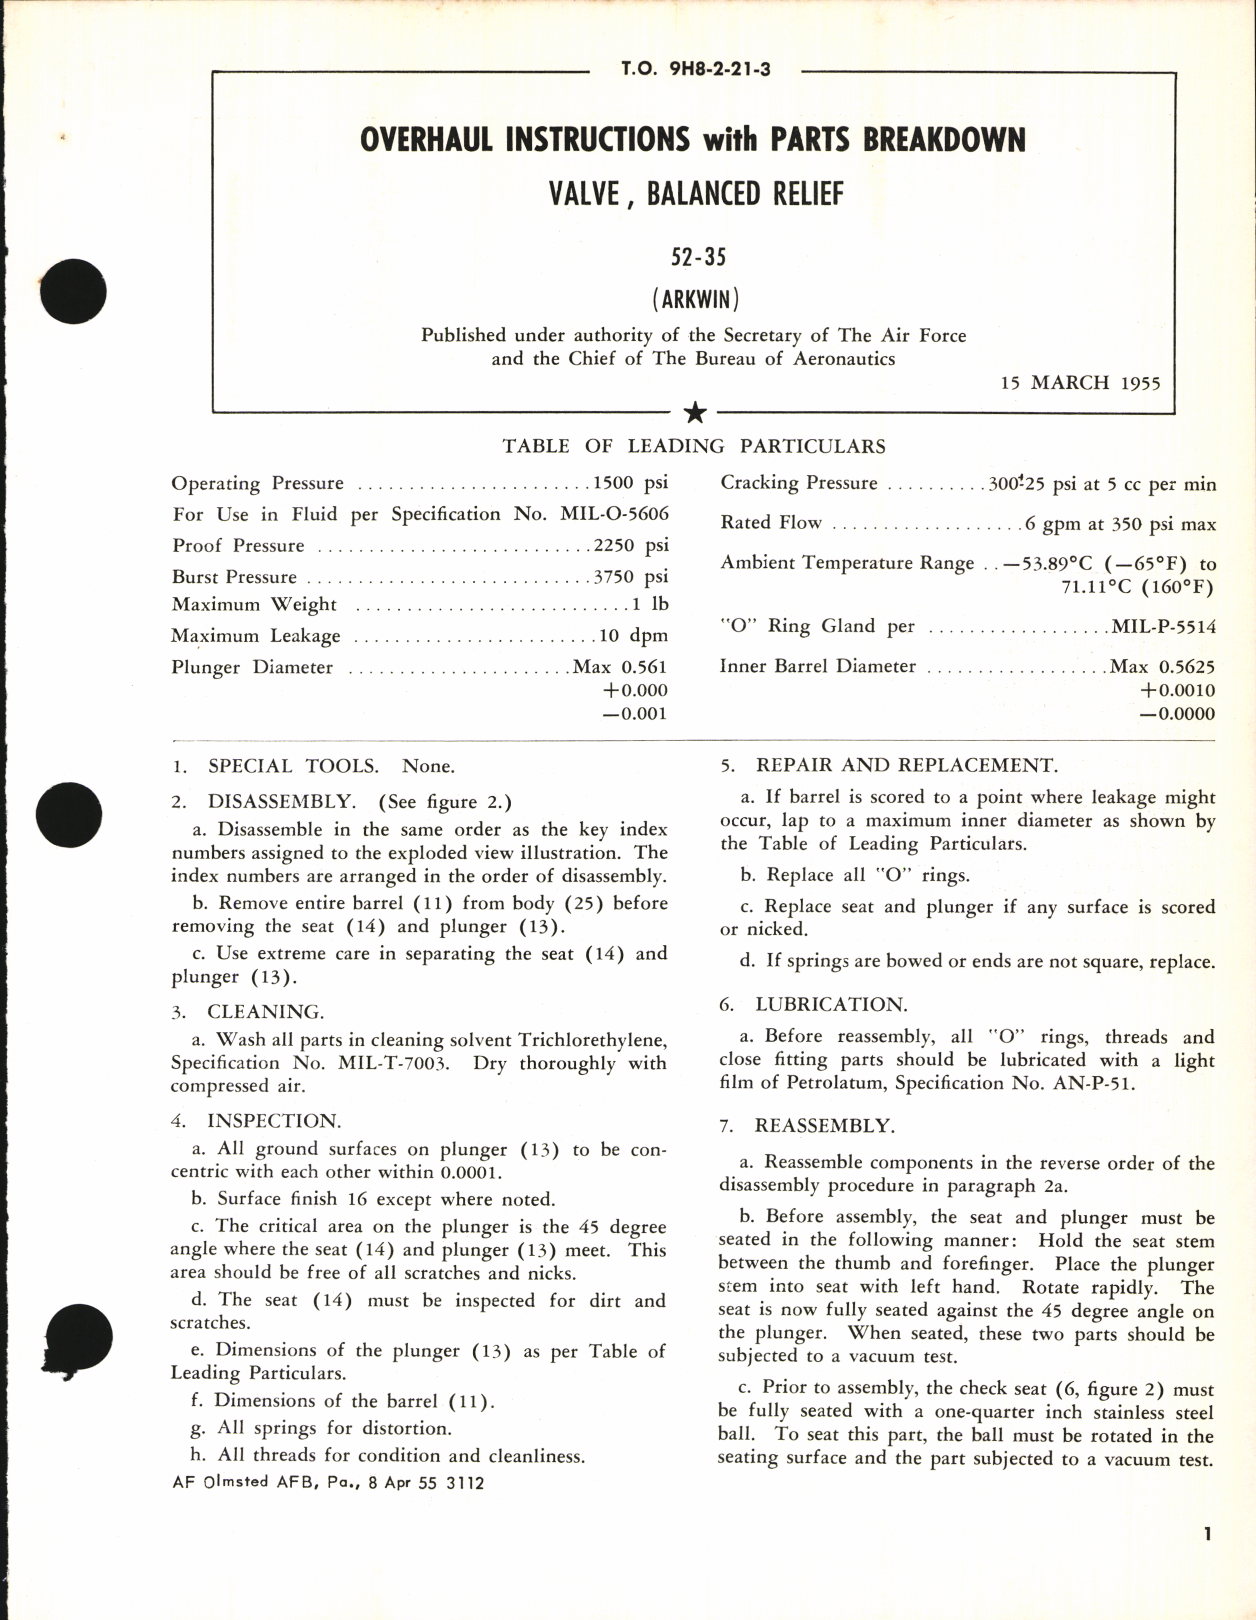 Sample page 1 from AirCorps Library document: Overhaul Instructions with Parts Breakdown for Valve, Balanced Relief 52-35